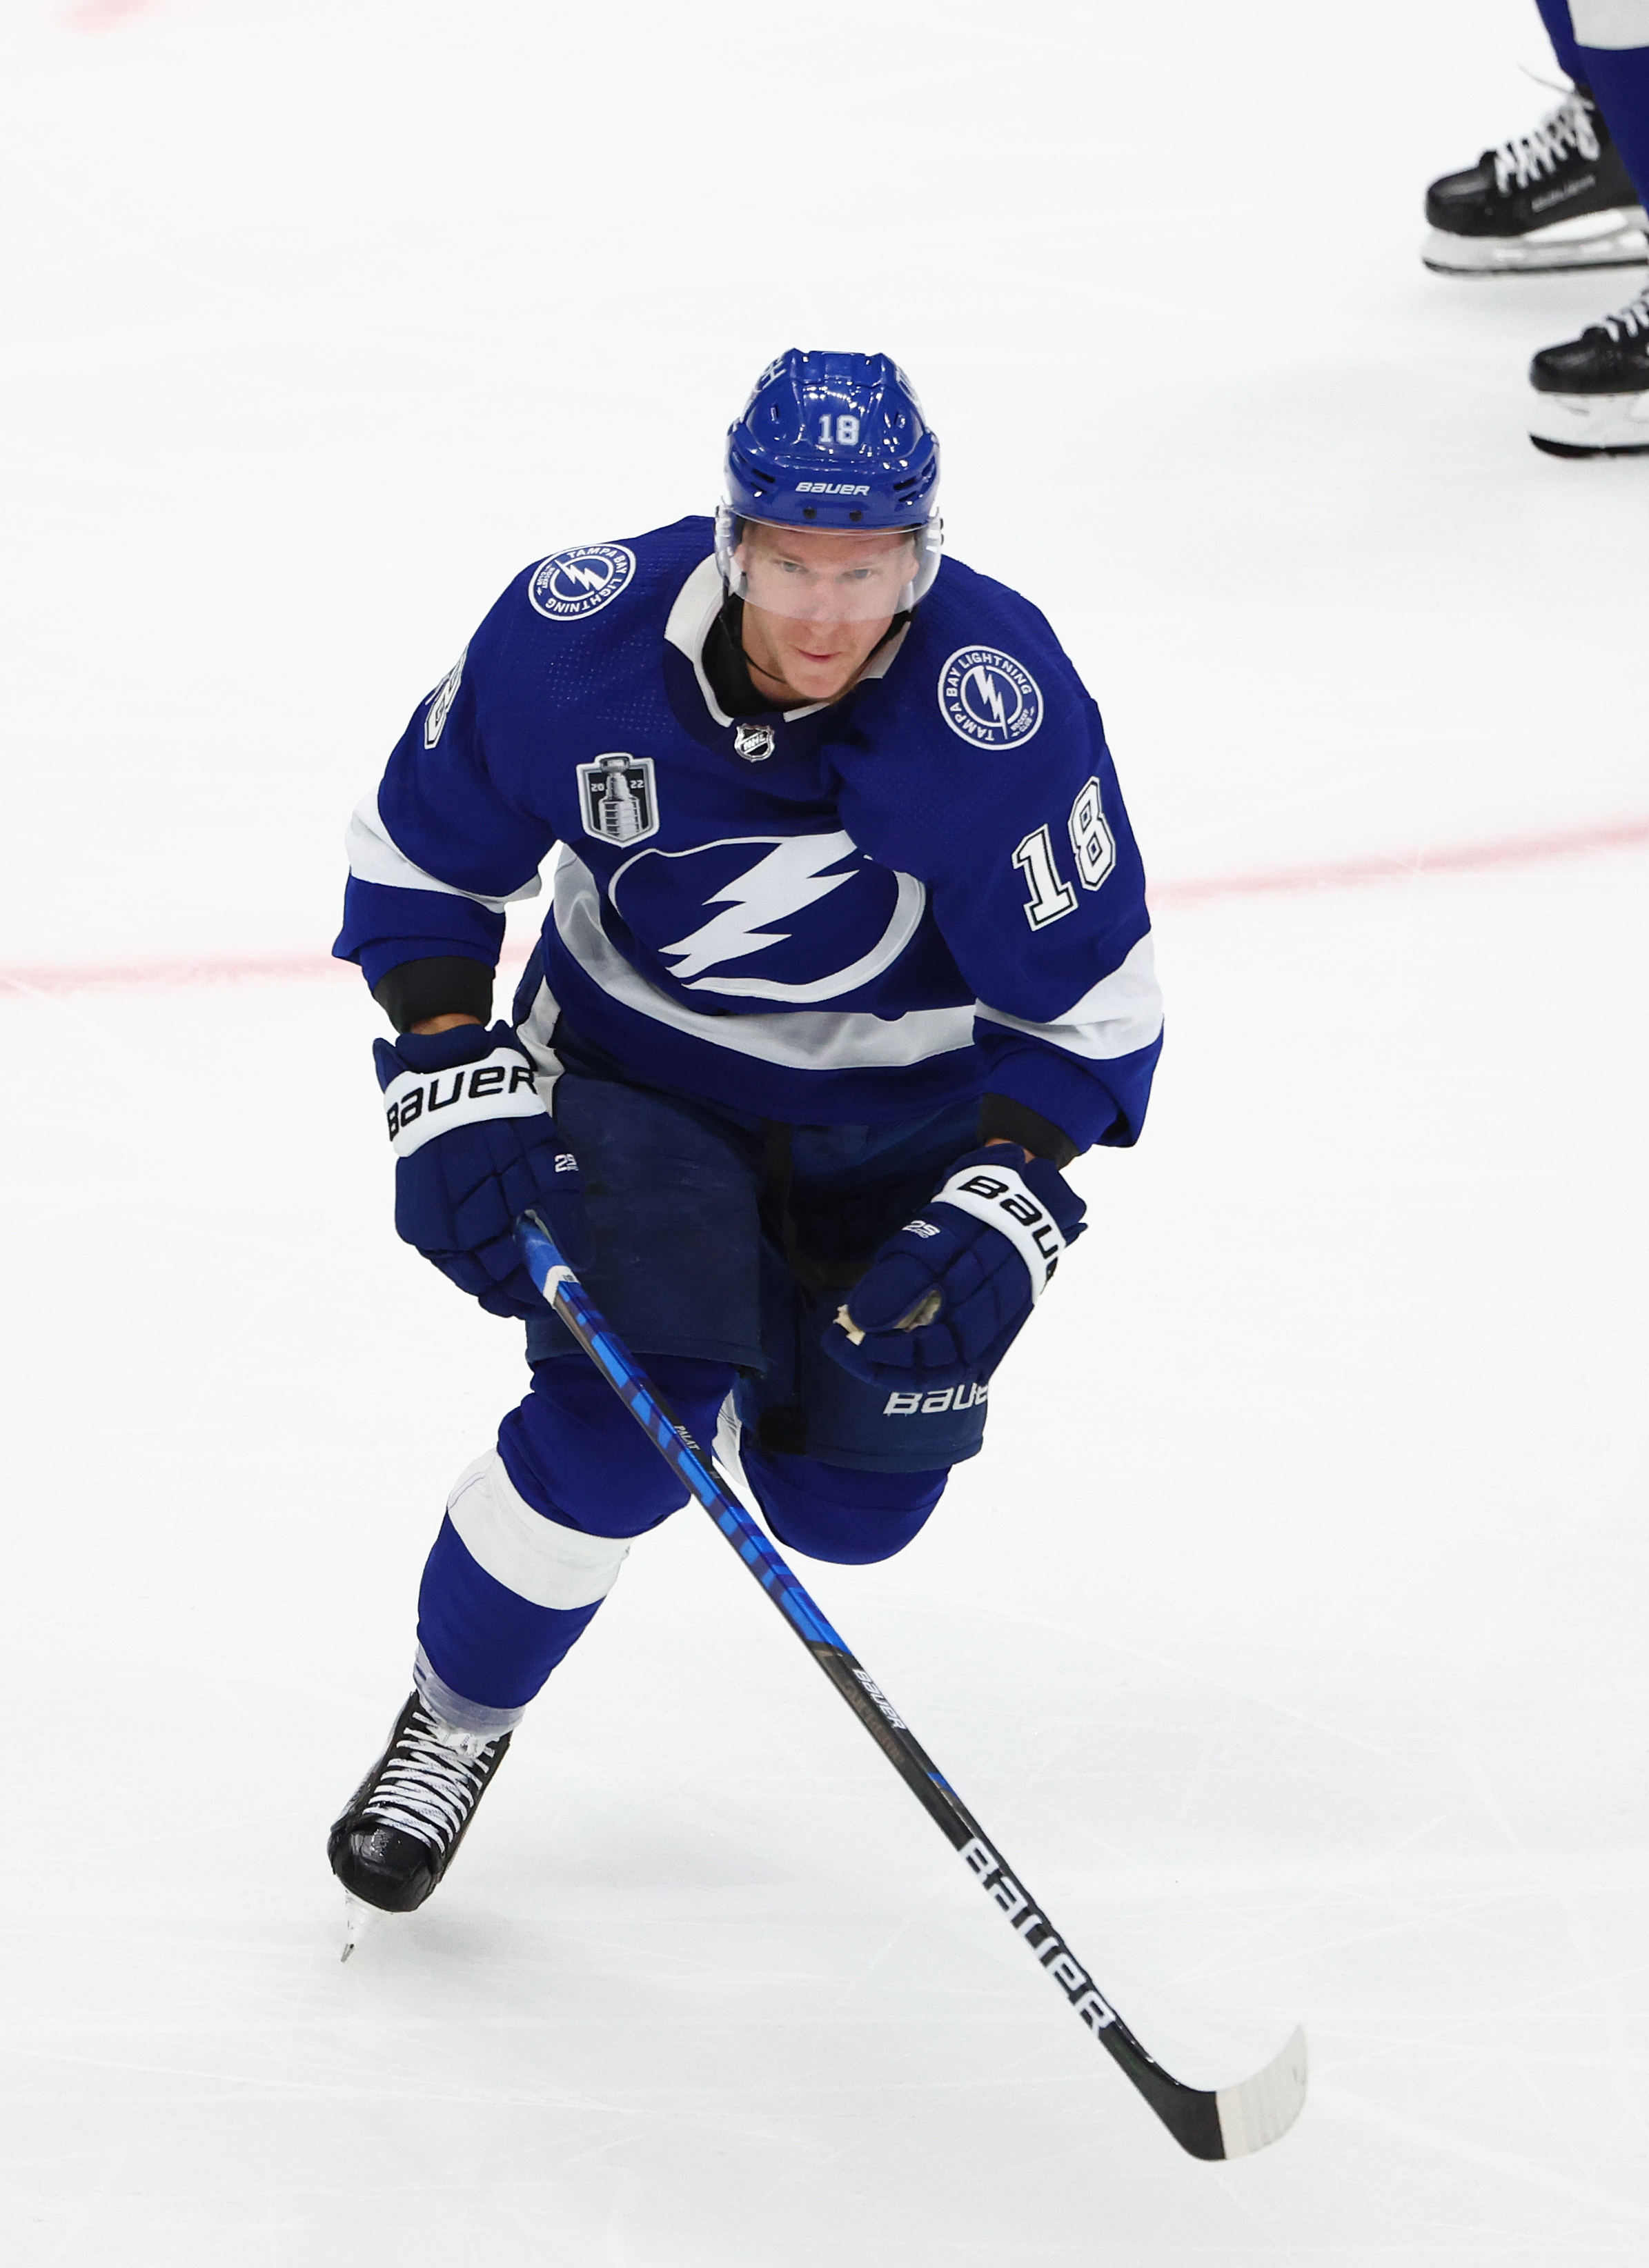 The Loss of Ondrej Palat Should Not Be Overlooked - All About The